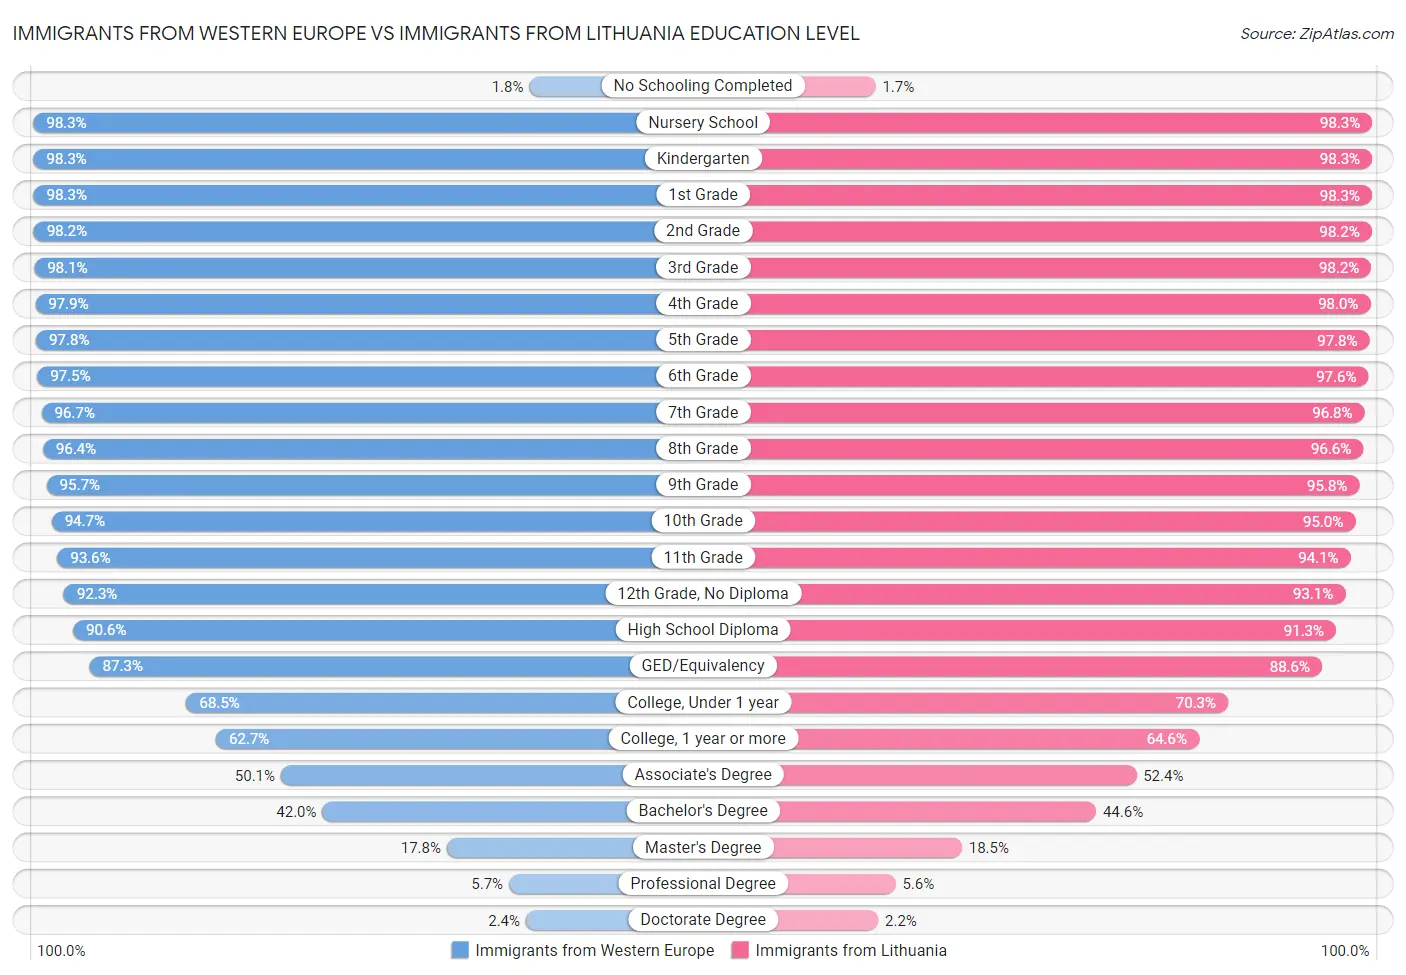 Immigrants from Western Europe vs Immigrants from Lithuania Education Level